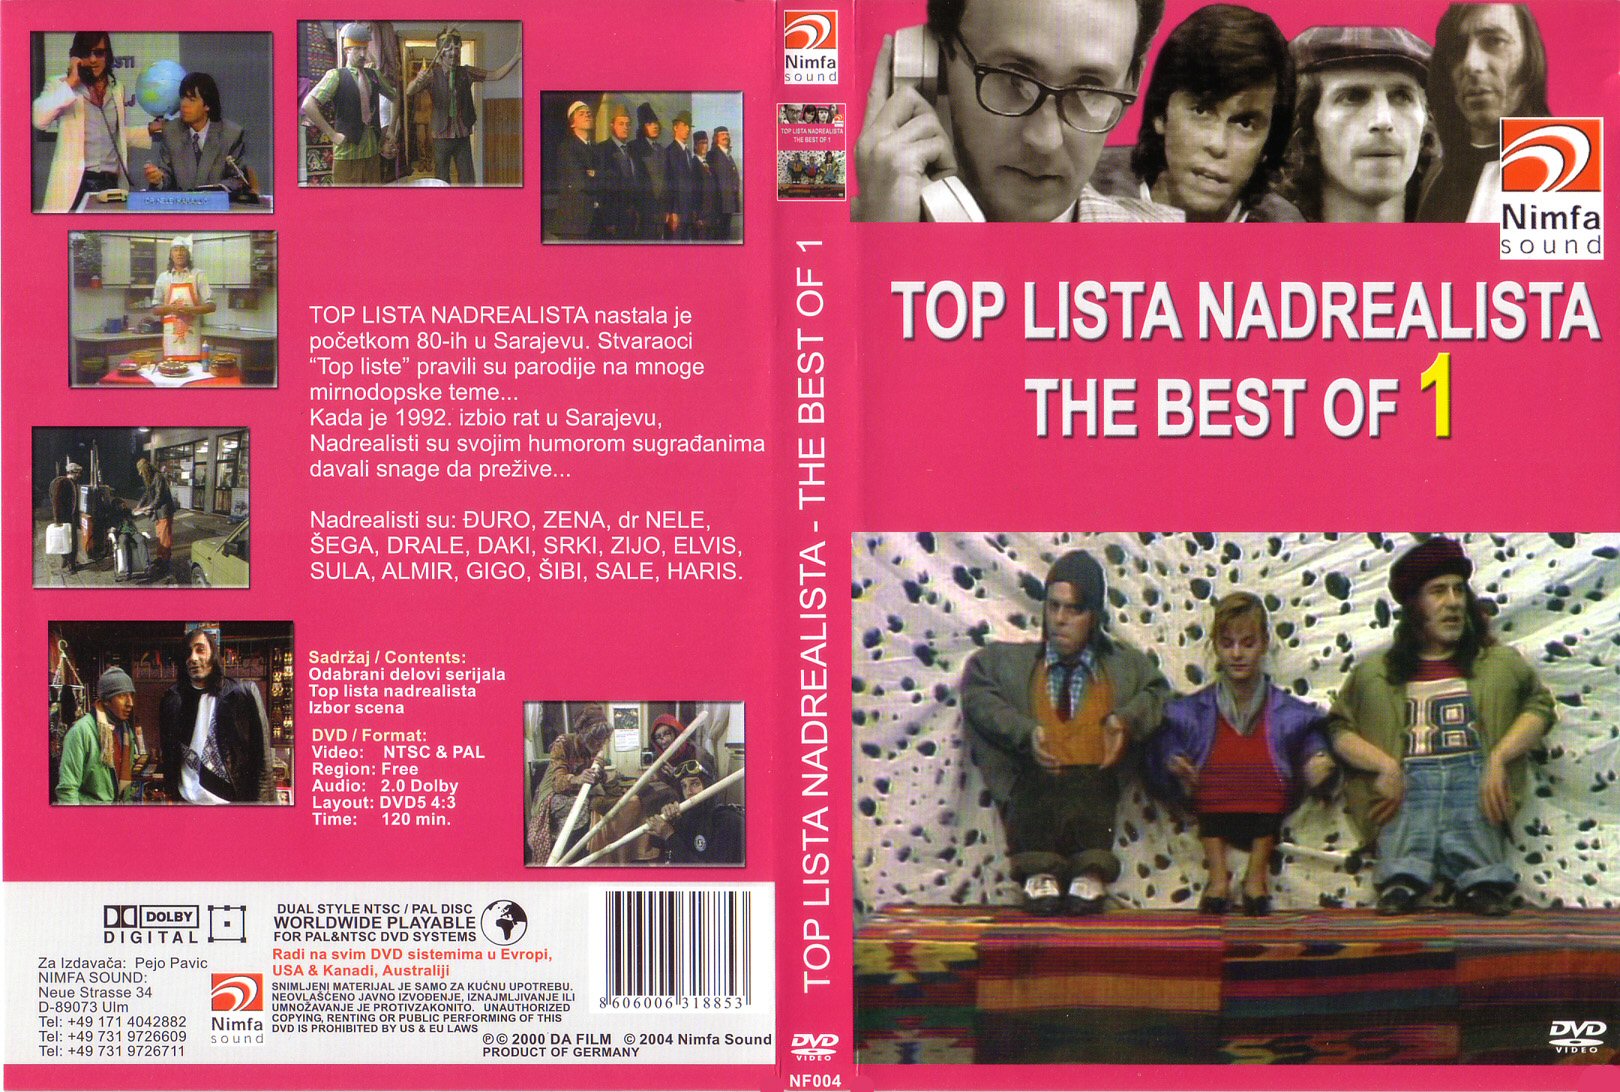 Click to view full size image -  DVD Cover - T - top_lista_nadrealista_the_best_of_1_dvd - top_lista_nadrealista_the_best_of_1_dvd.jpg